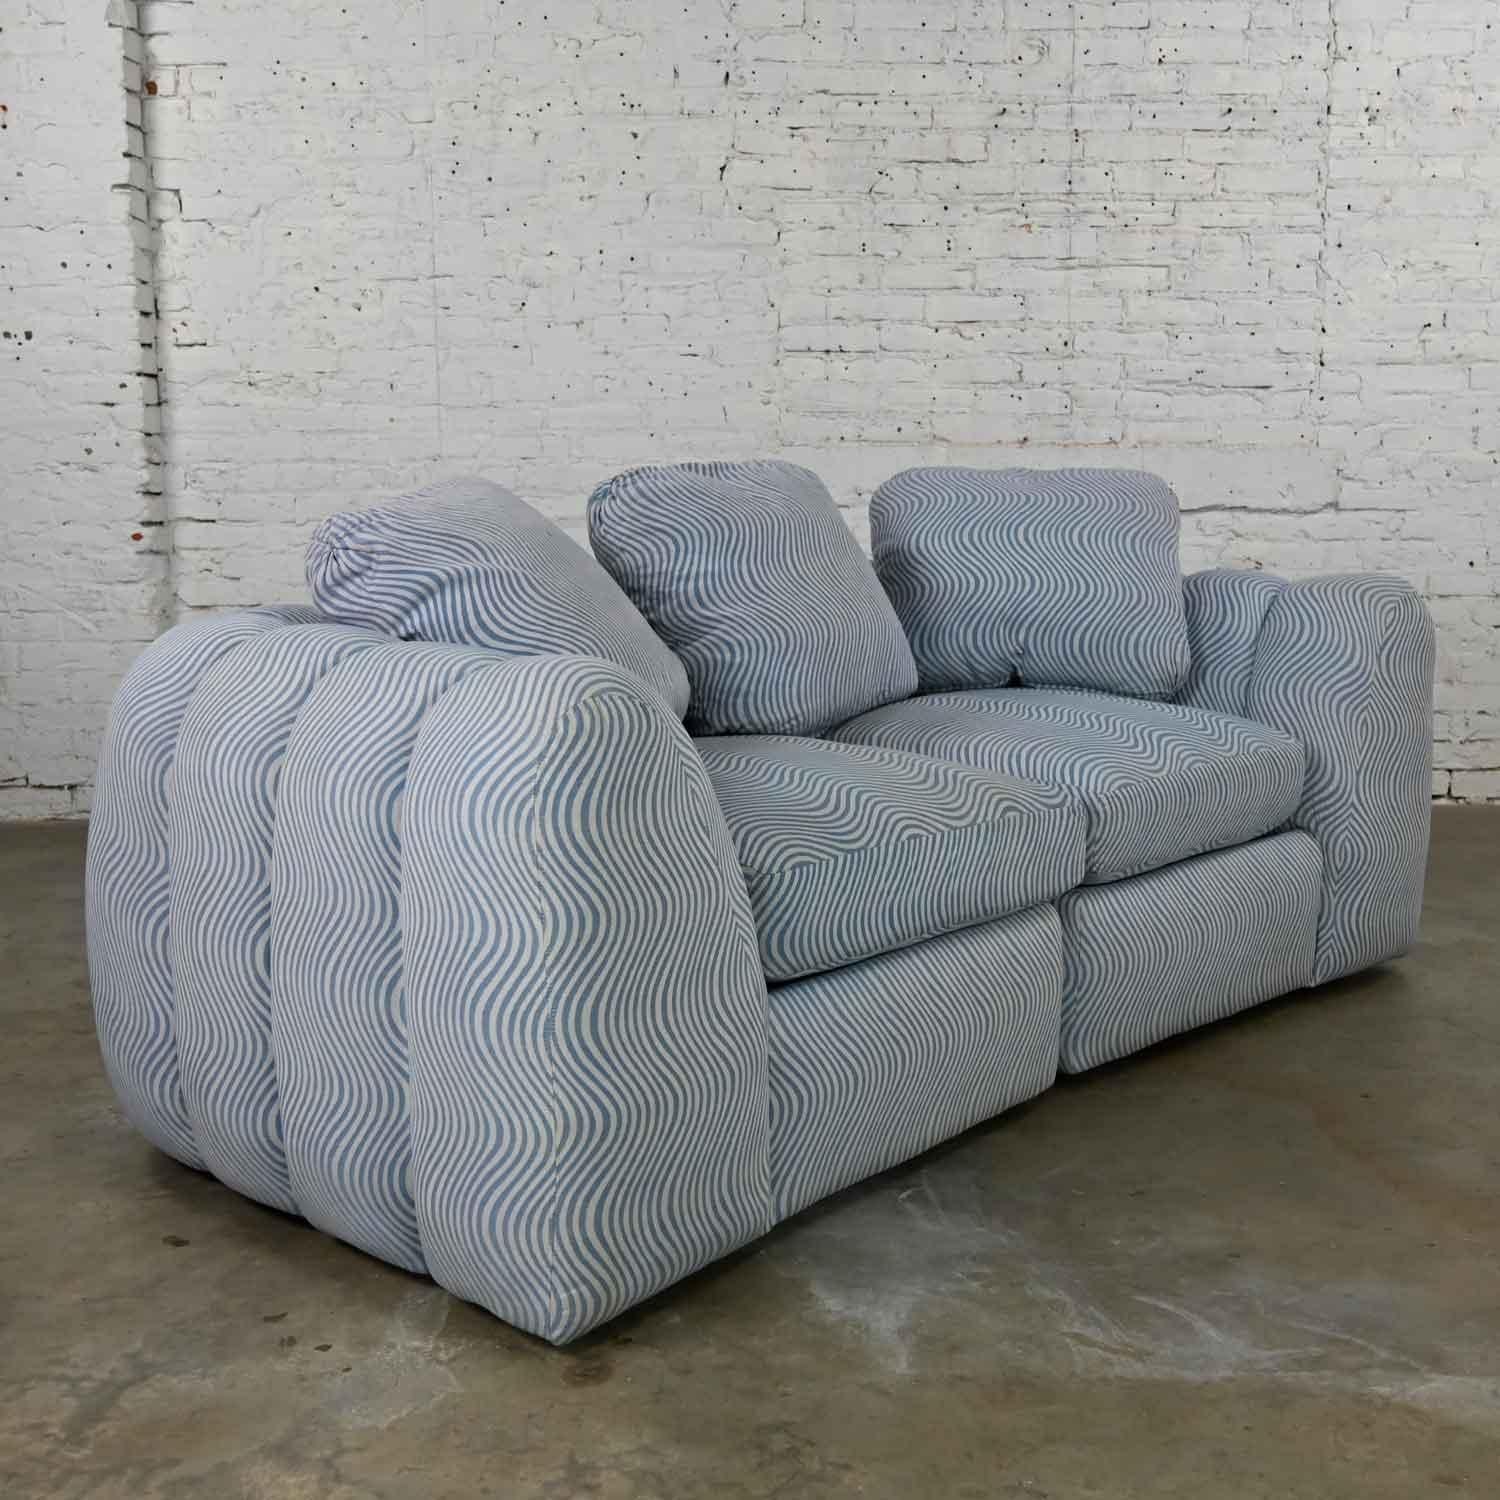 Wonderful modern to postmodern channeled sectional loveseat or lounge chairs in the style of Jay Spectre. Comprised of foam seats, feather down back pillows, upholstered in blue & white fabric. Beautiful condition, keeping in mind that this is